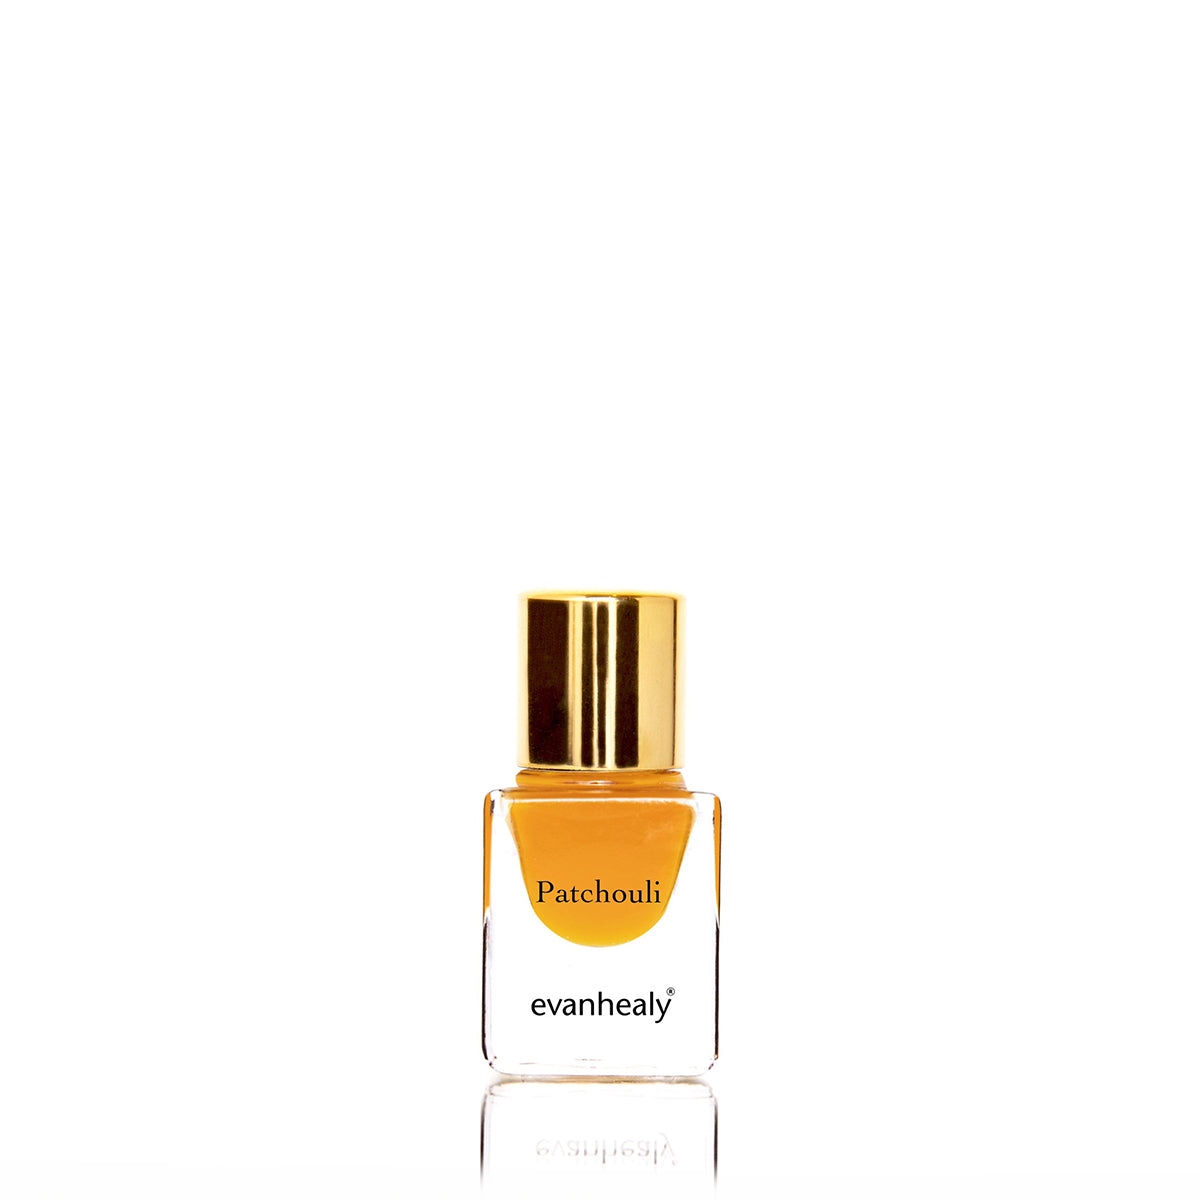 evanhealy patchouli essential oil perfume